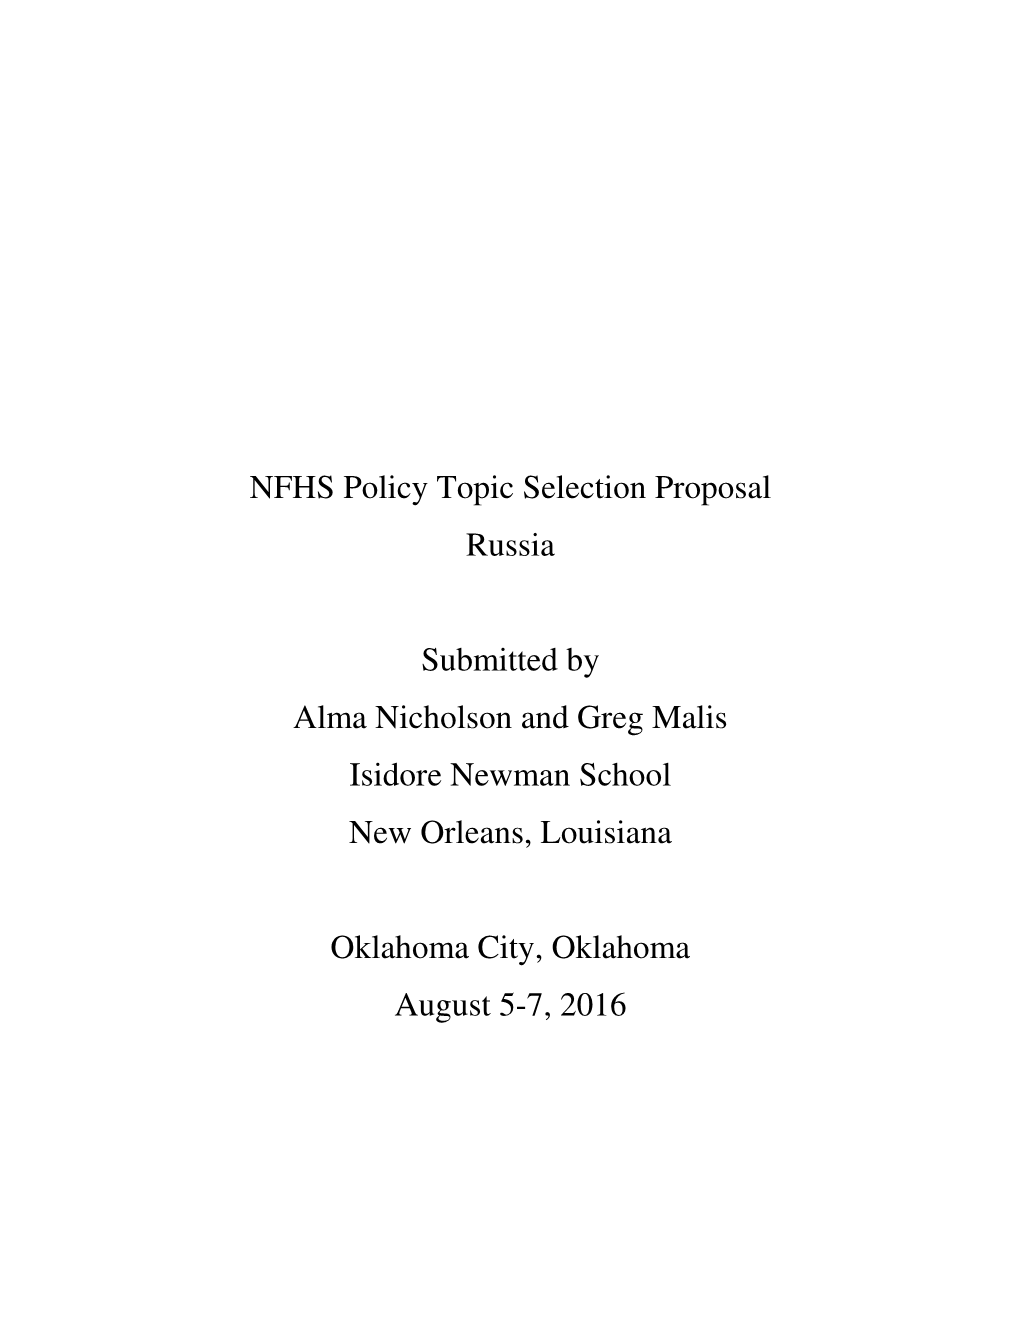 NFHS Policy Topic Selection Proposal Russia Submitted by Alma